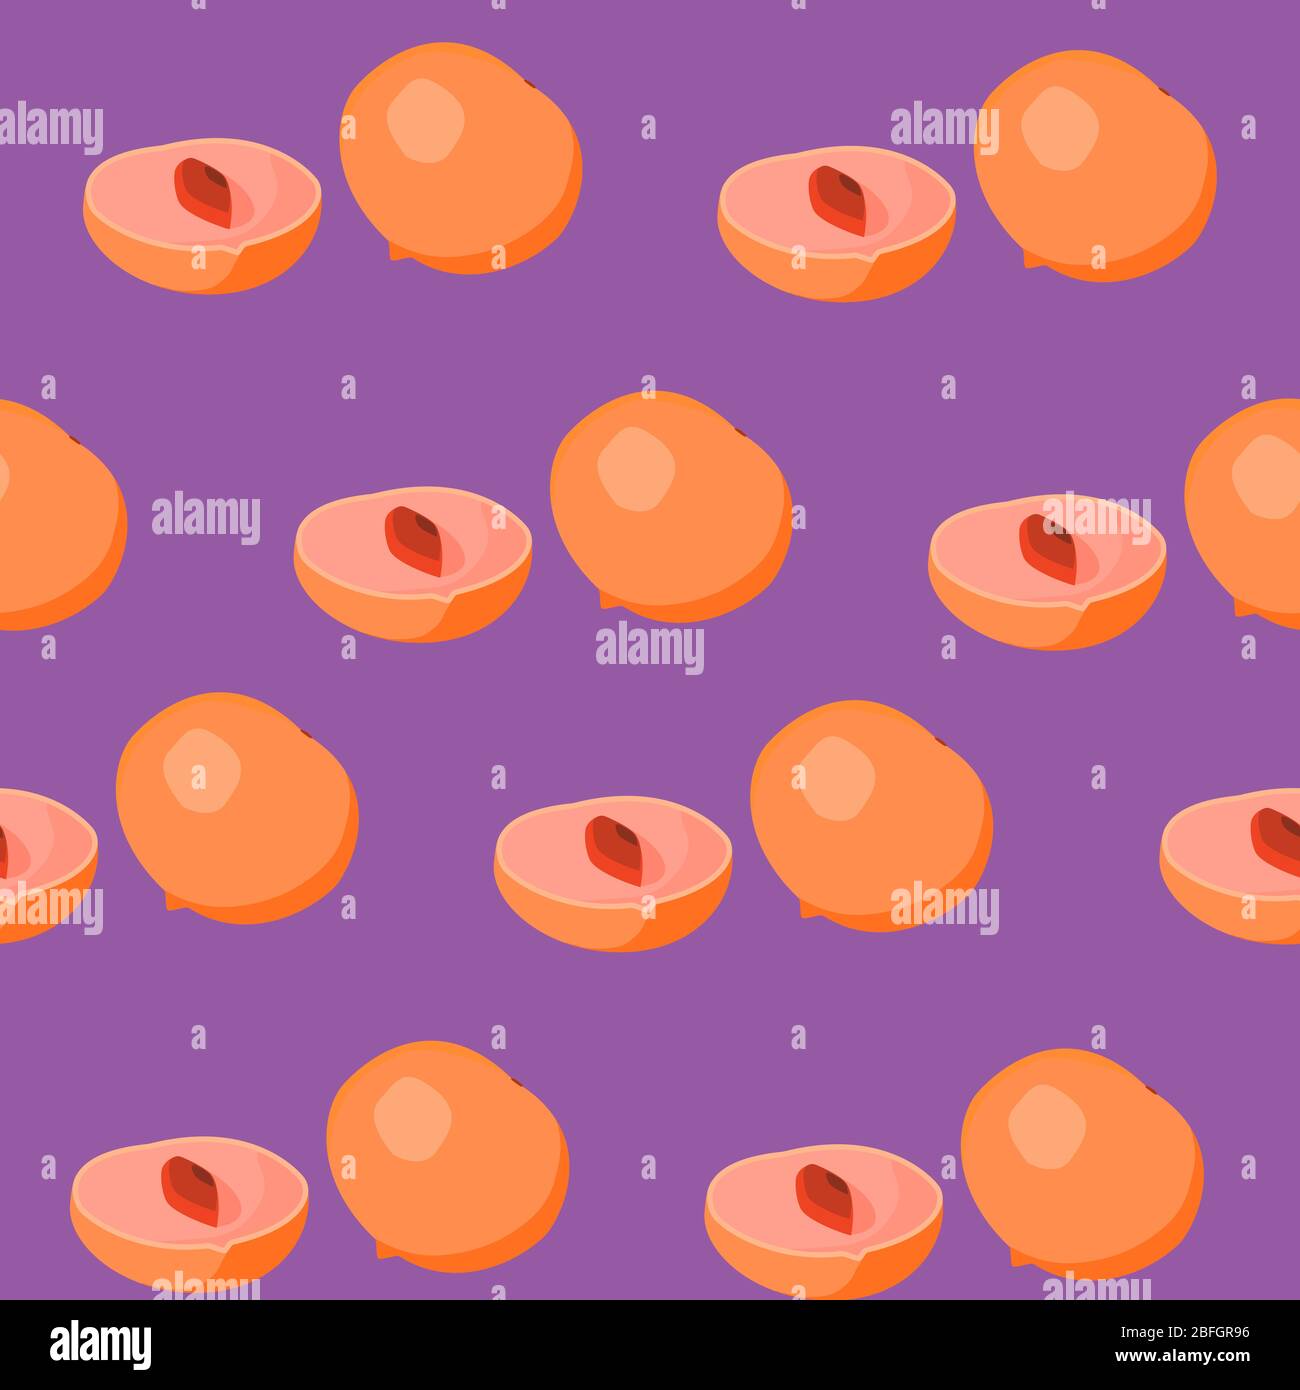 Abstract seamless background design cloth texture with abui fruit elements. Creative vector endless fabric pattern with shapes of small Pouteria Stock Vector